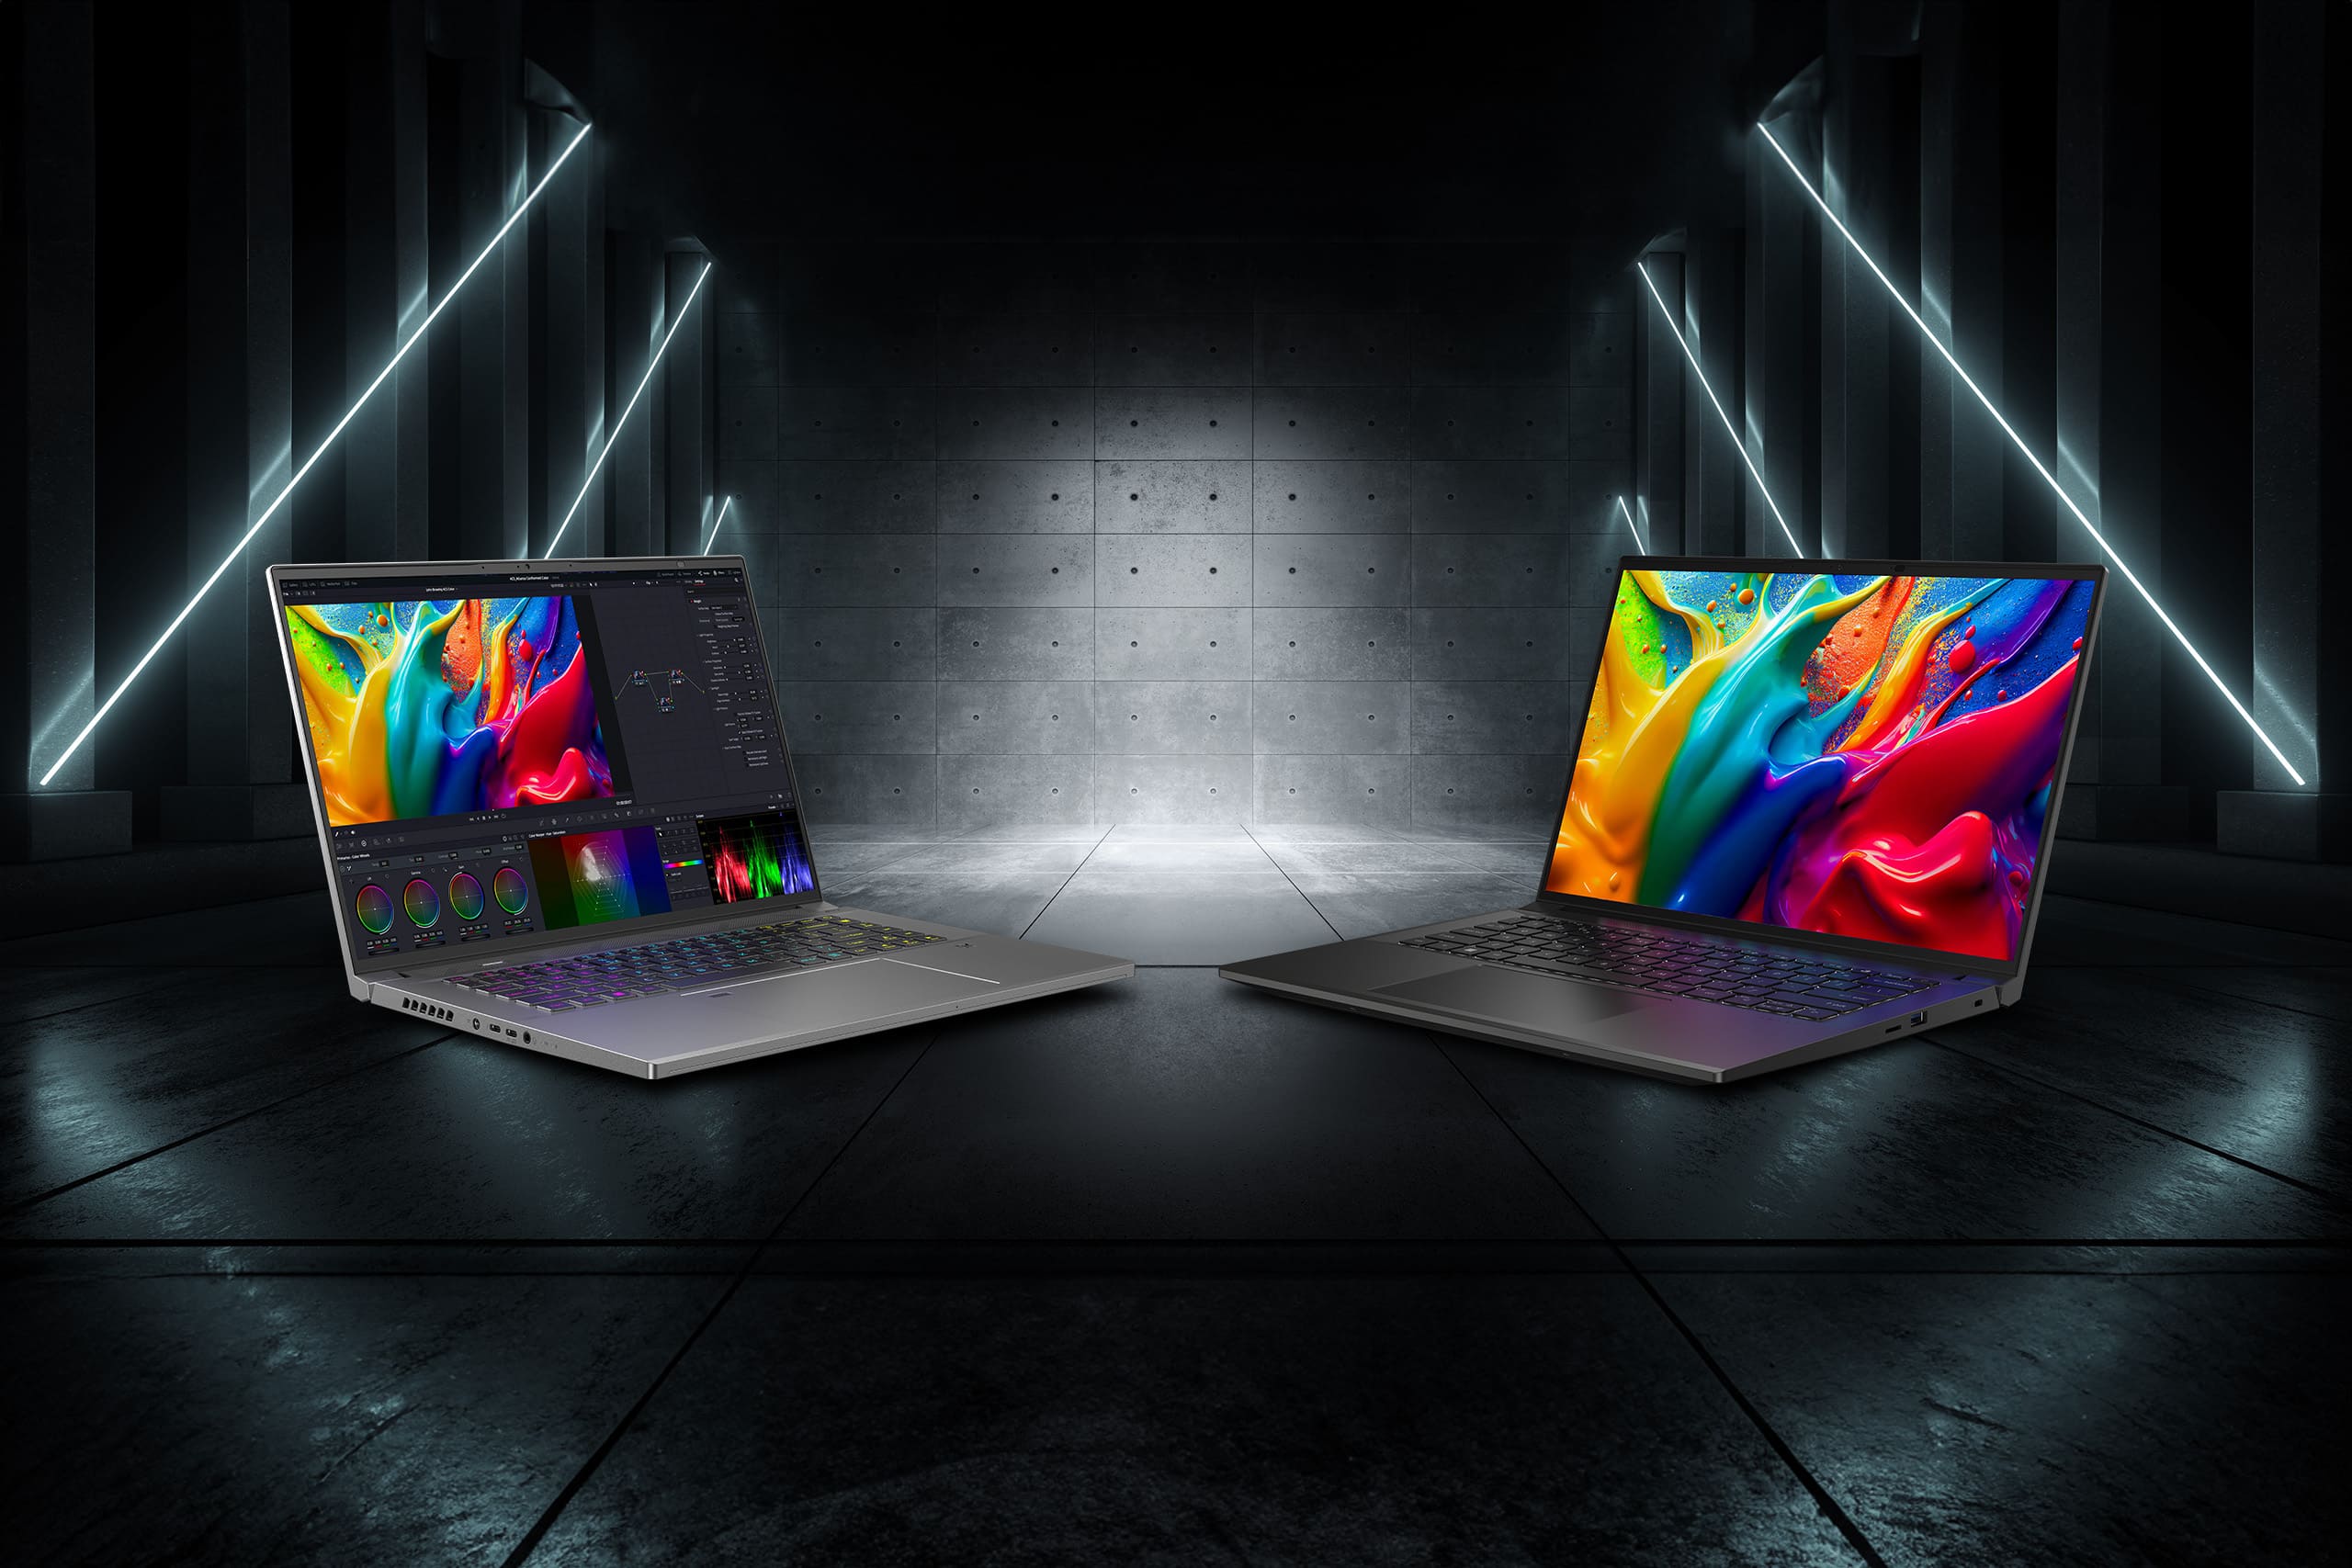 image with edgy black background, two acer monitors in view displaying multicolor image